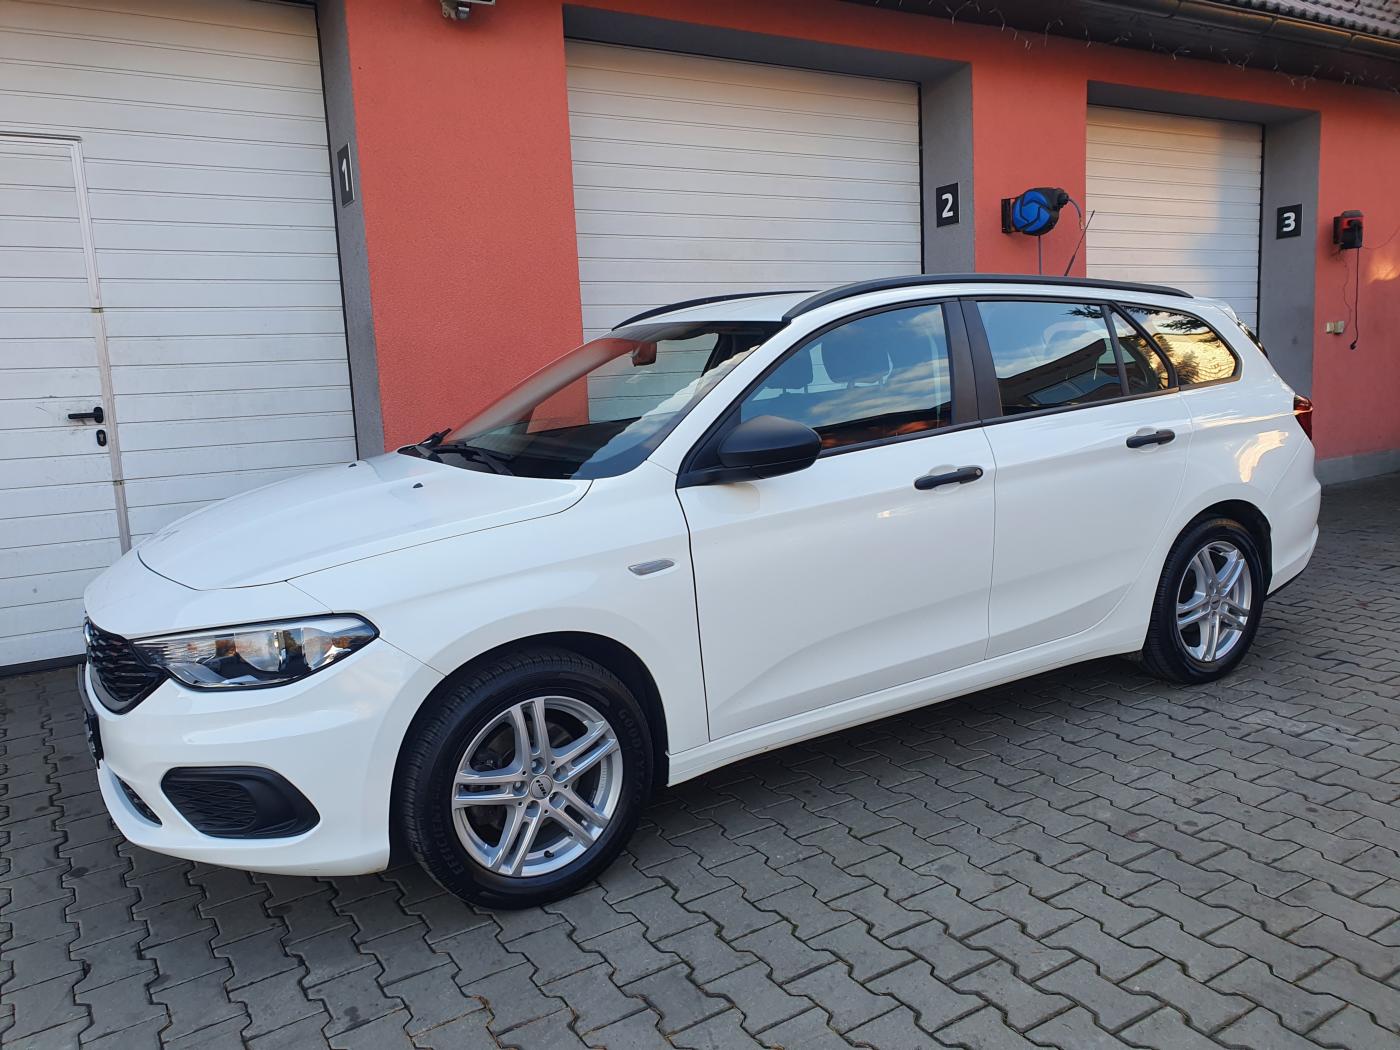 Fotogalerie Fiat Tipo 1.4 i 70 kW 